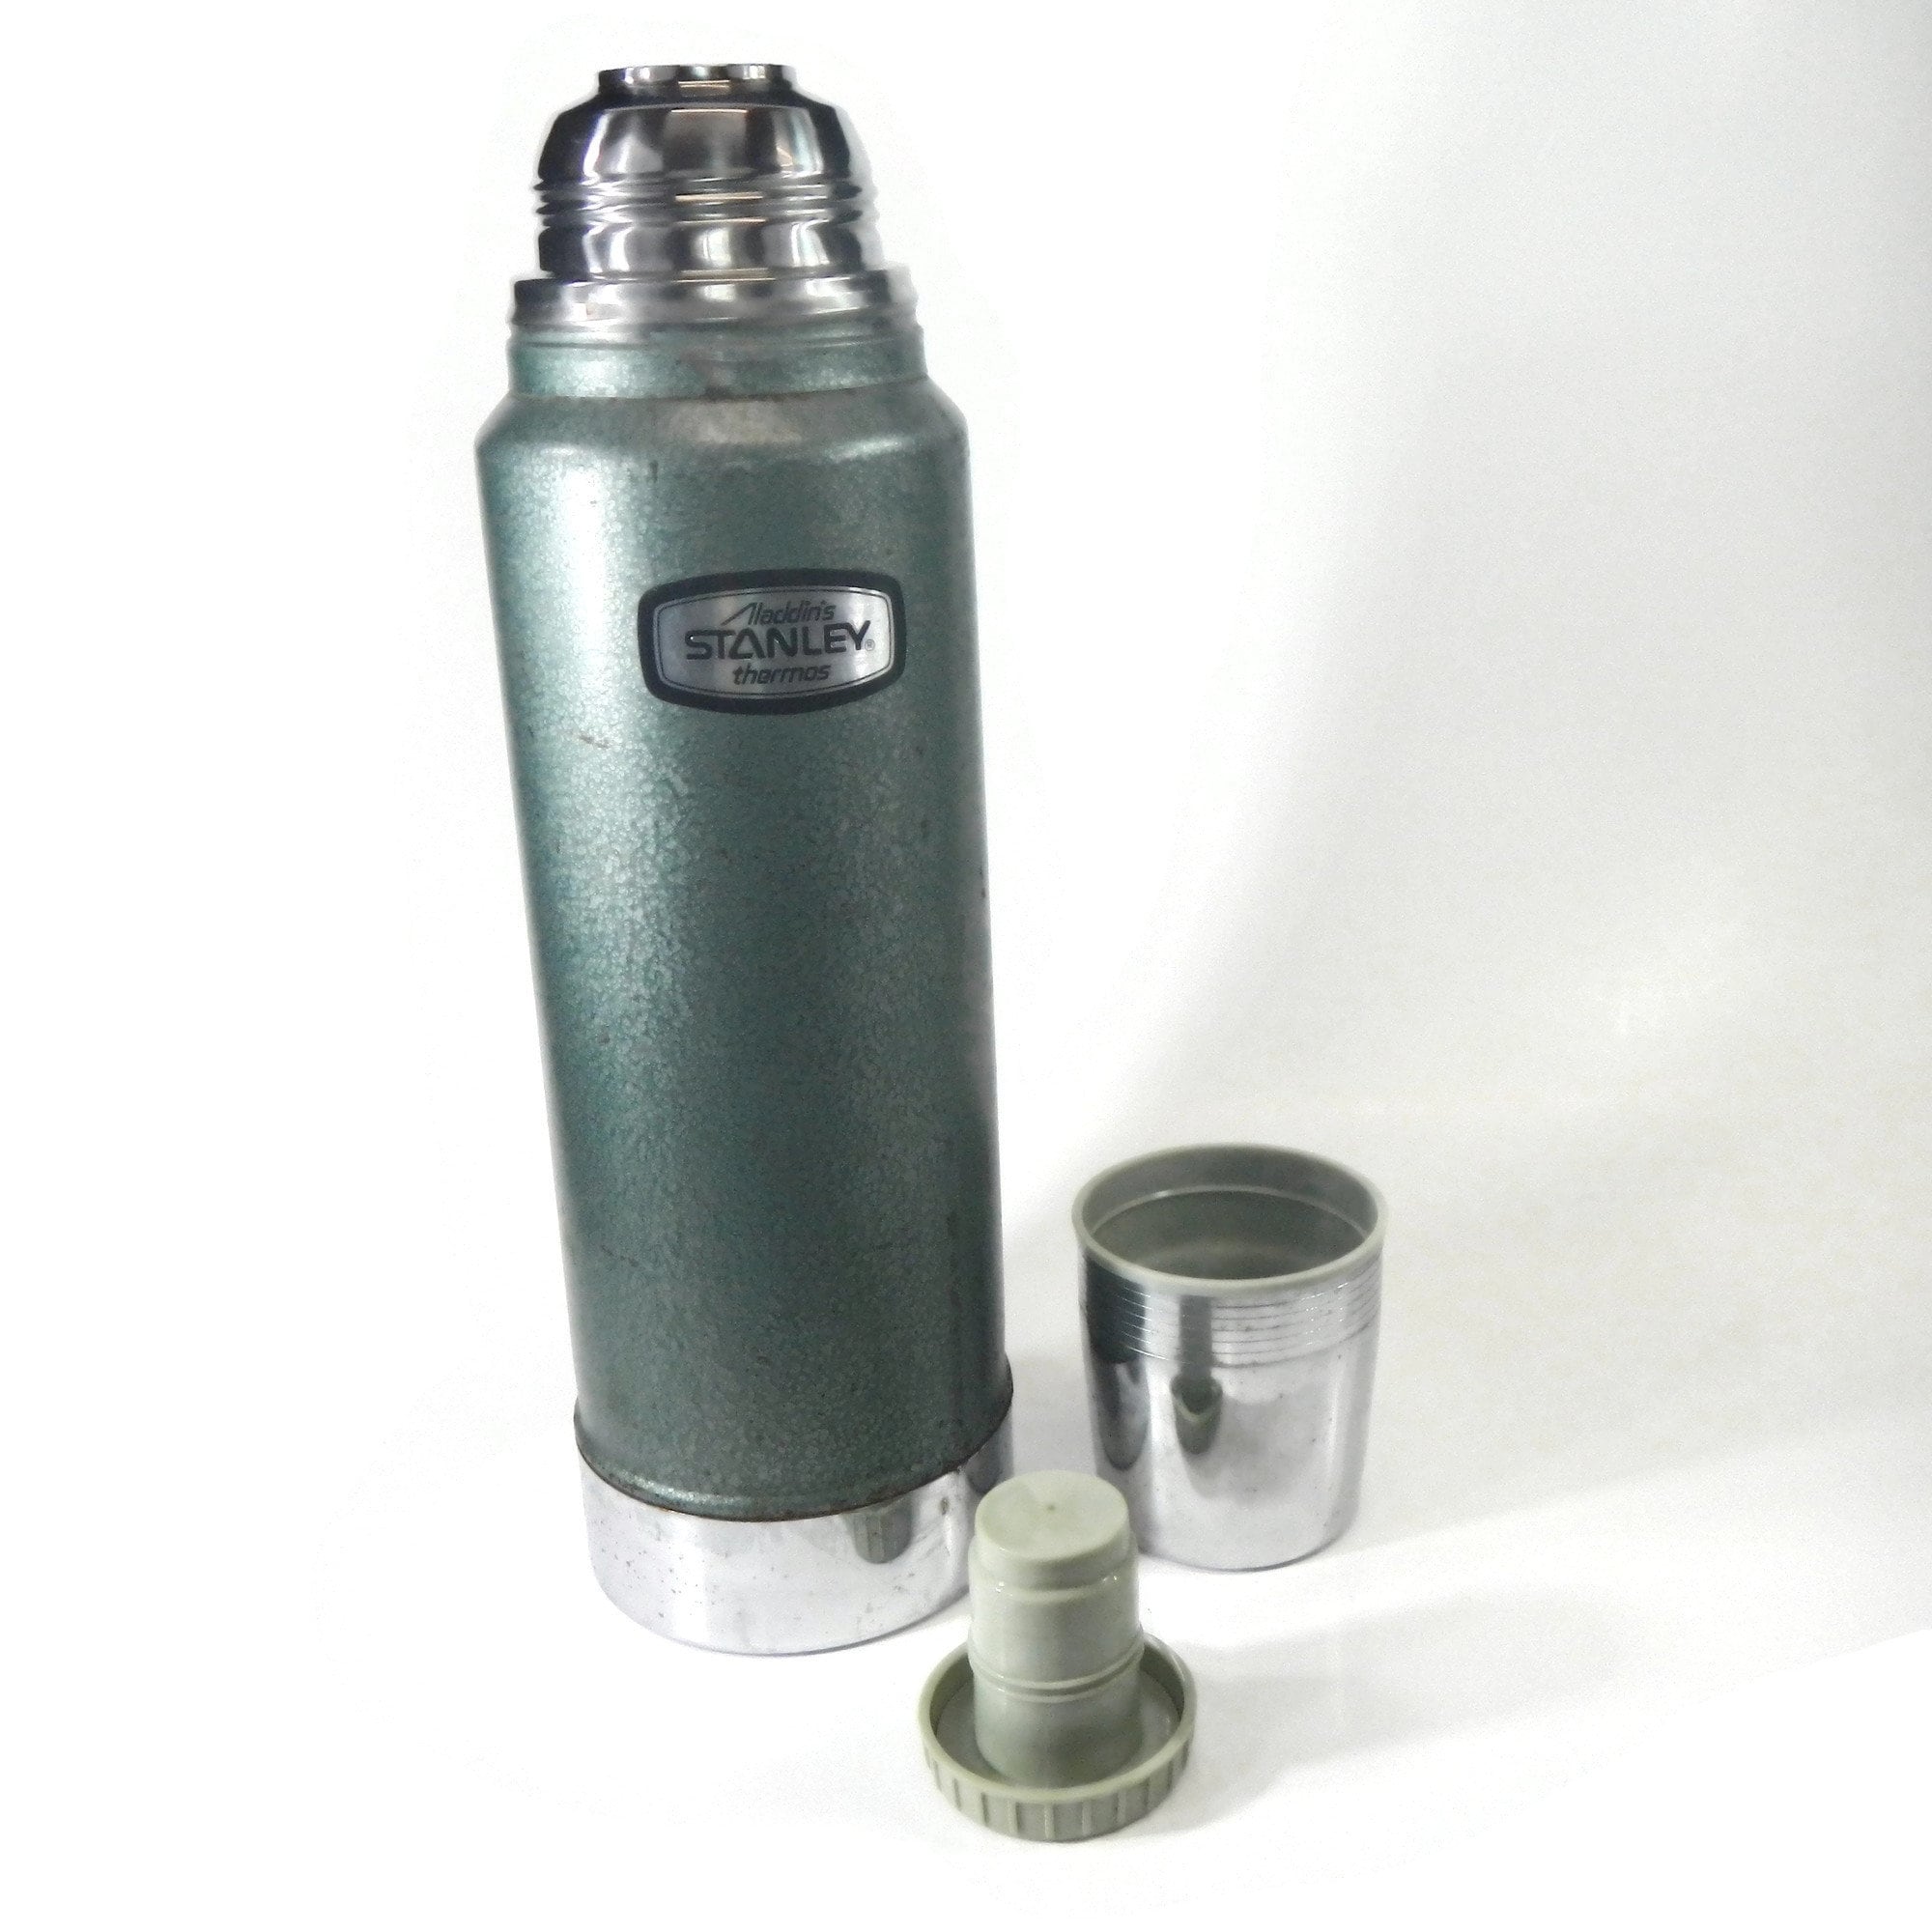 Vintage Stanley Thermos, Stanley Aladdin Thermos A-944DH Vacuum Bottle 